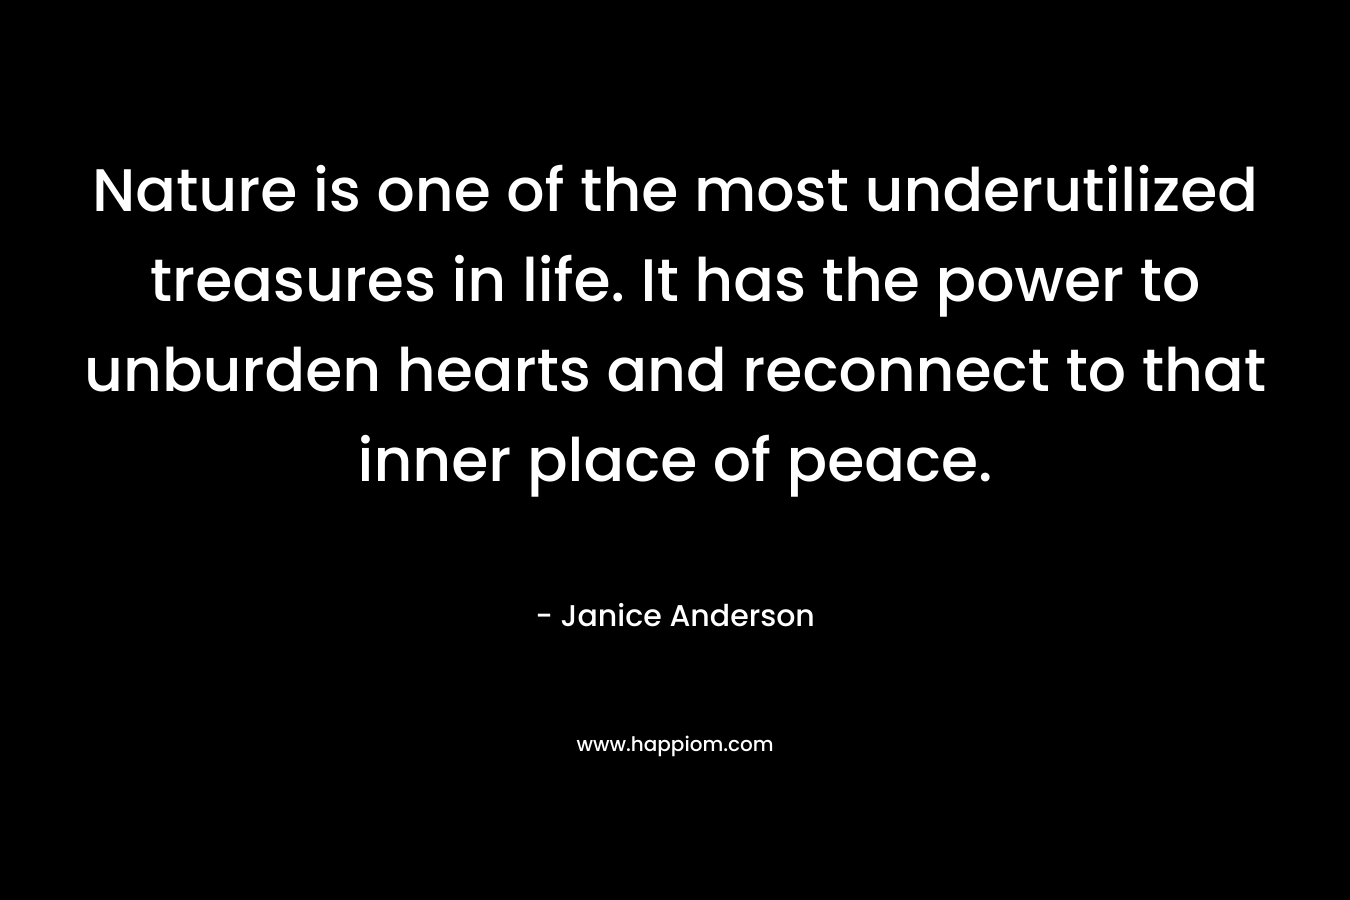 Nature is one of the most underutilized treasures in life. It has the power to unburden hearts and reconnect to that inner place of peace. – Janice  Anderson